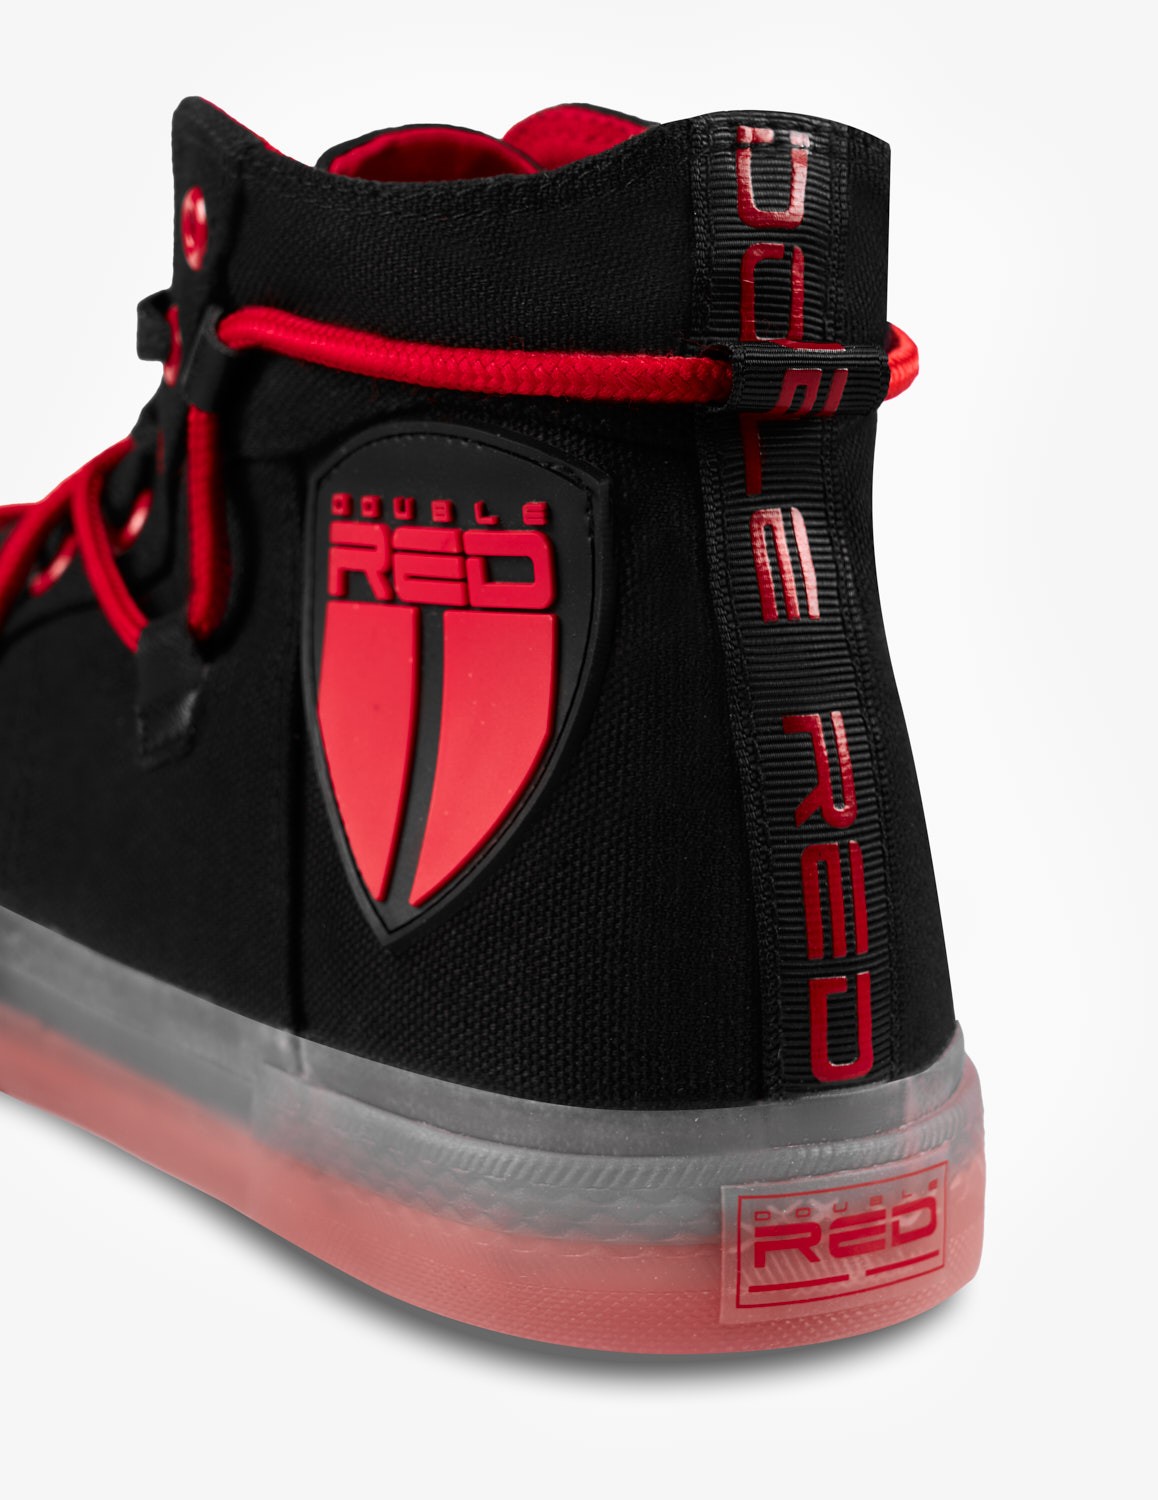 SPIDEX CANVAS Shoes Black/Red